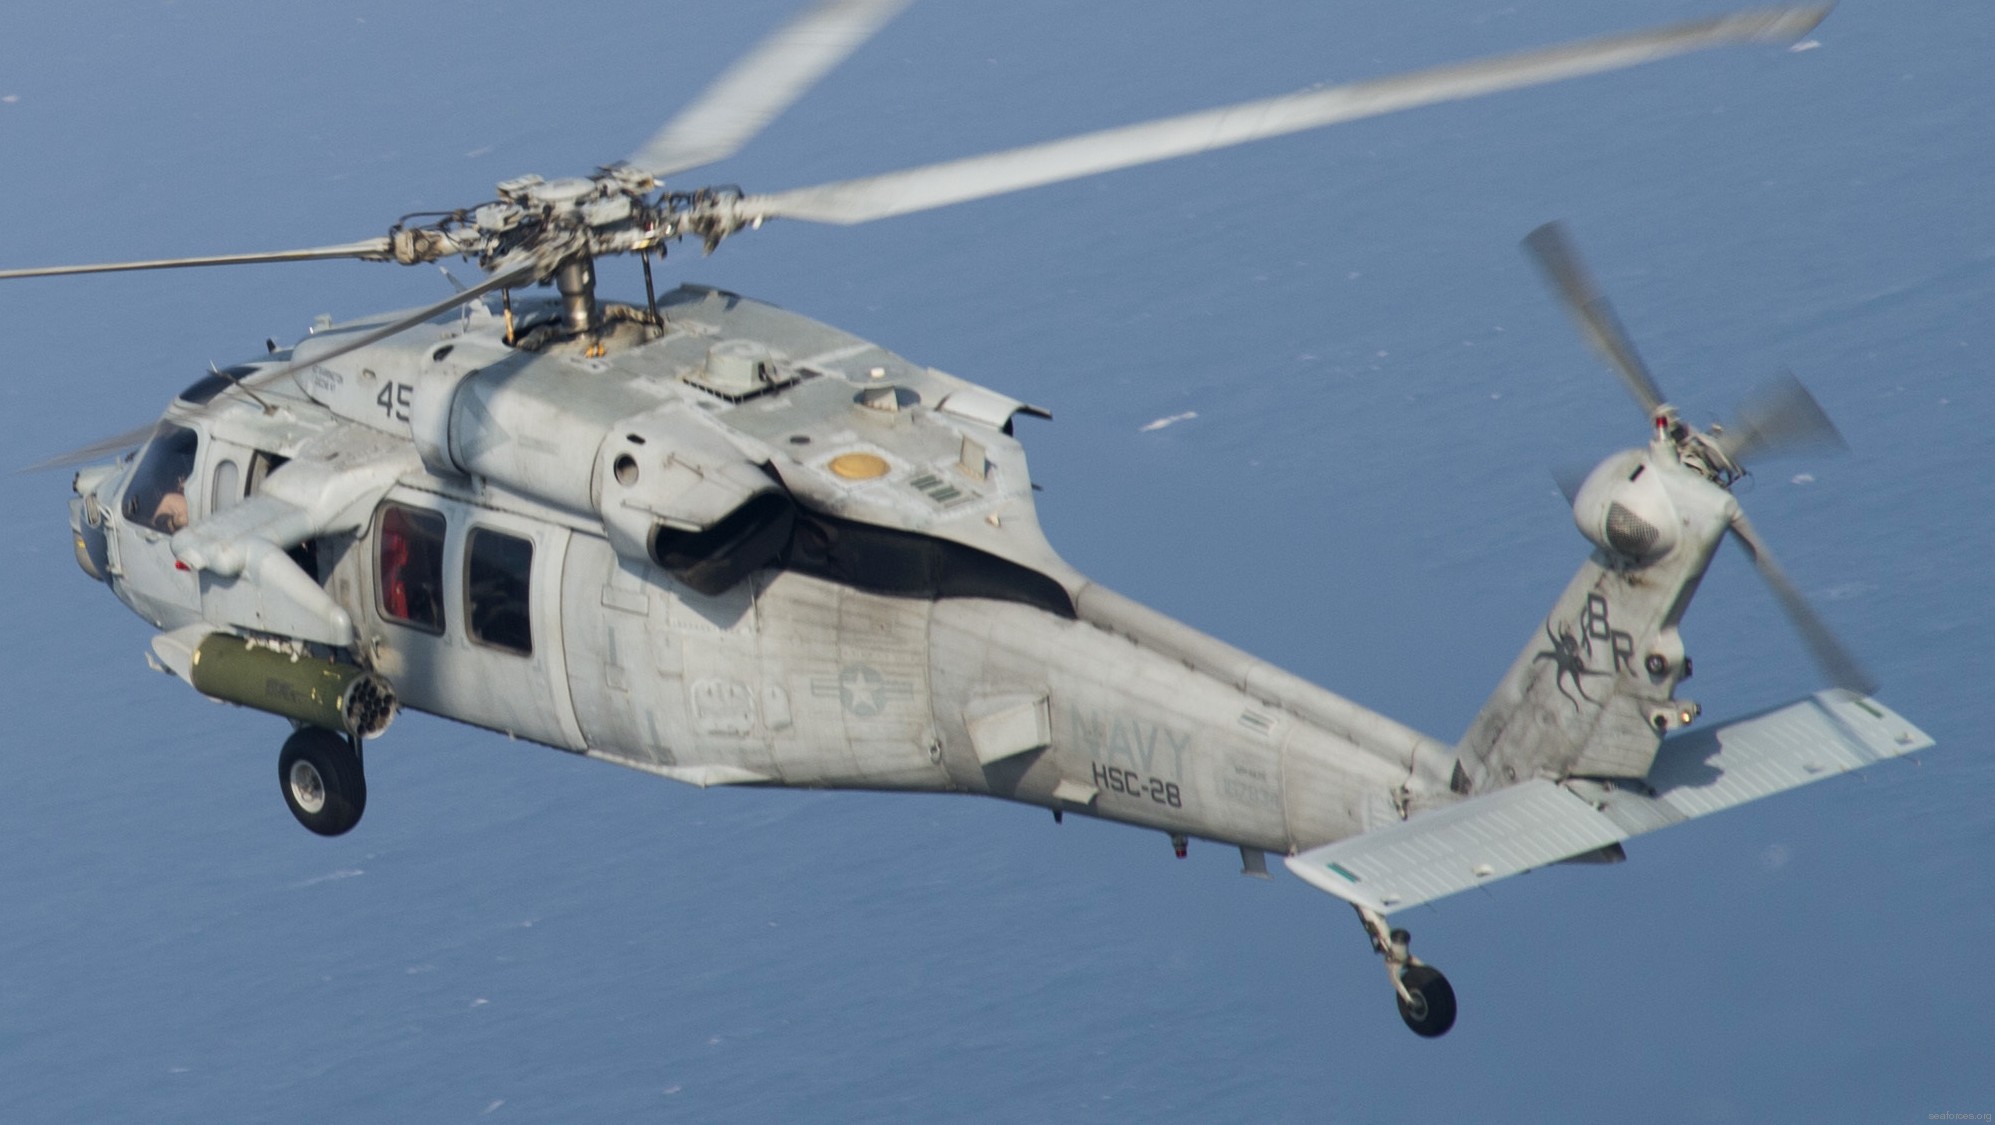 hsc-28 dragon whales helicopter sea combat squadron mh-60s seahawk us navy 234 uss kearsarge lhd-3